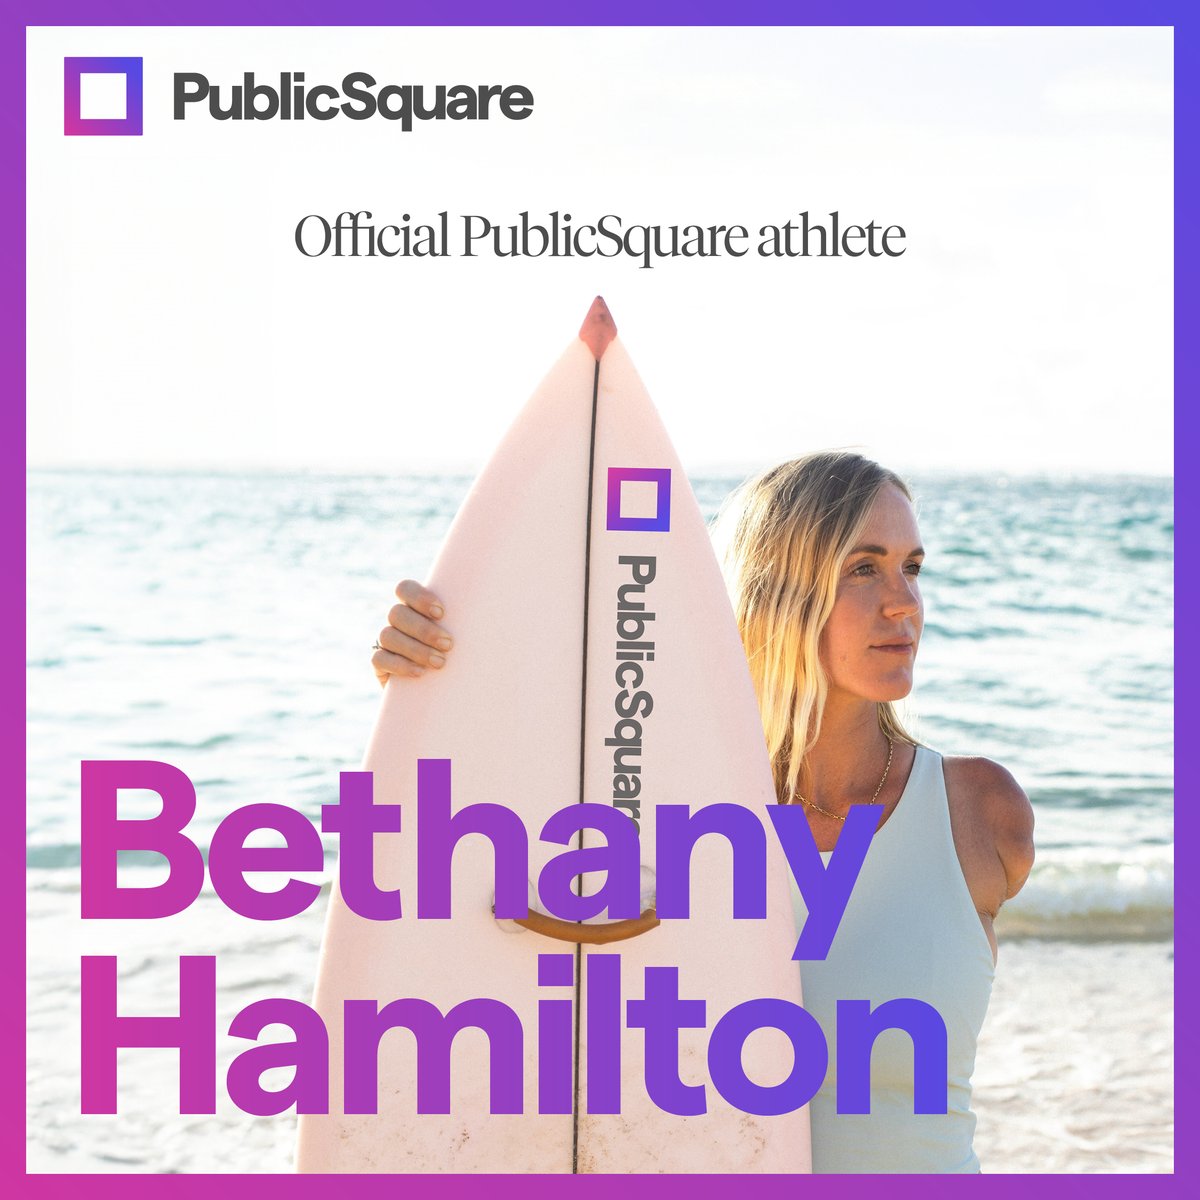 Beyond stoked to announce our partnership with @bethanyhamilton! Family and freedom are very important. Having the ability to shop with businesses who understand your values has been increasingly important over the last few years. Keep your eye out for all the incredible…